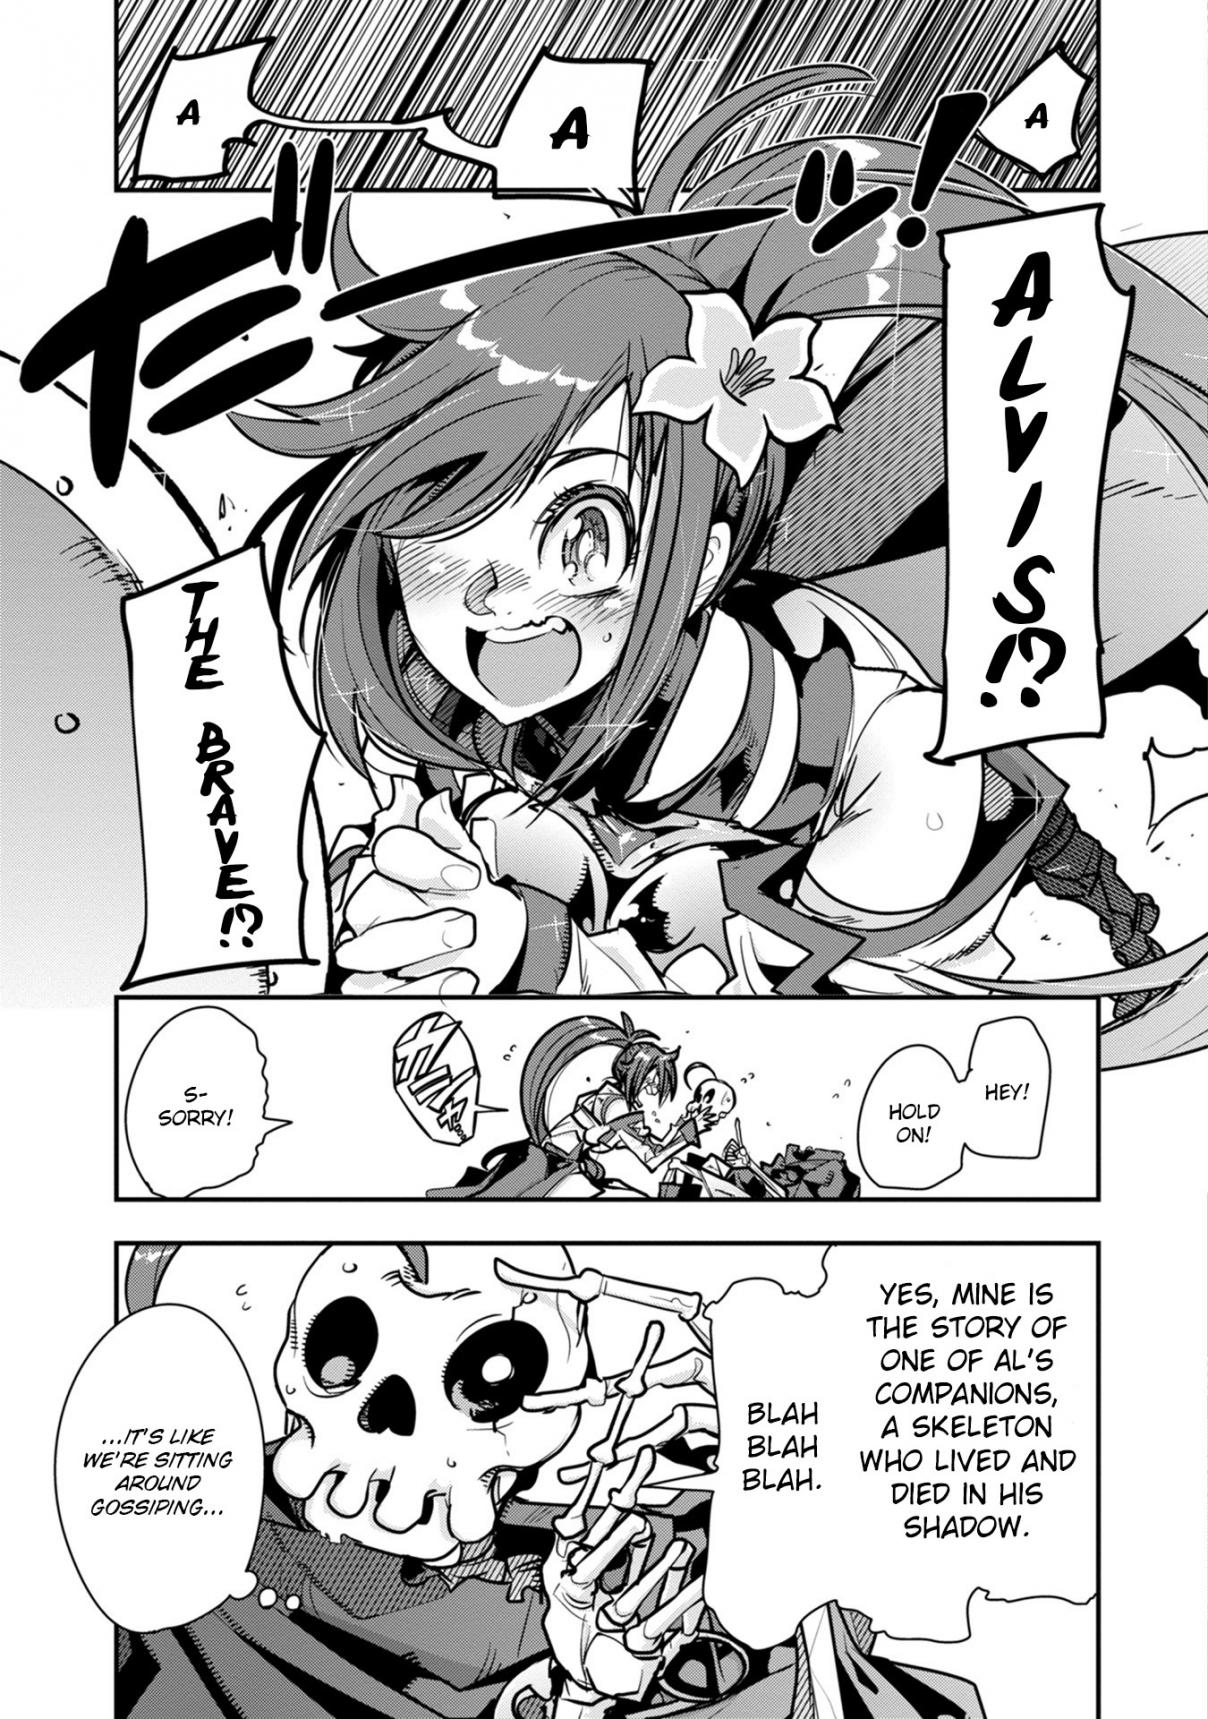 A Skeleton who was The Brave Vol. 1 Ch. 3 The skeleton adventurer challenges an underground dungeon, just like an undead would. (Part 2)